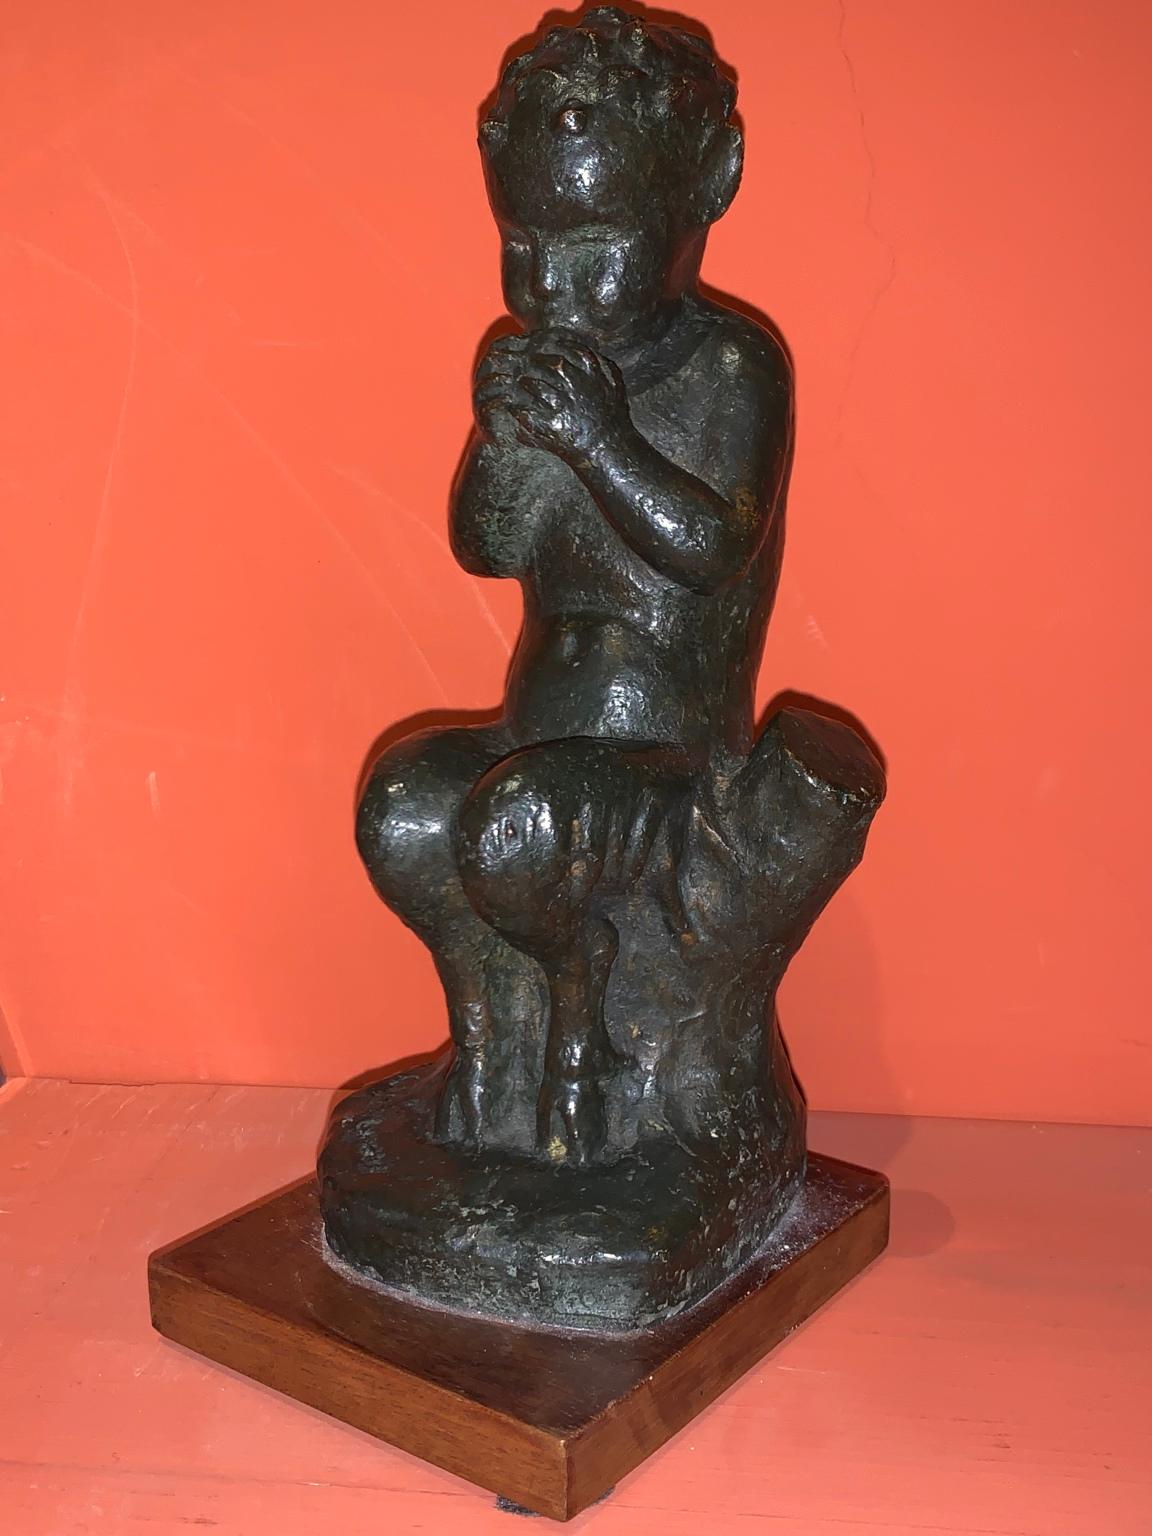 1930s bronze faun child signed at base  - Sculpture by Rodolfo Castagnino